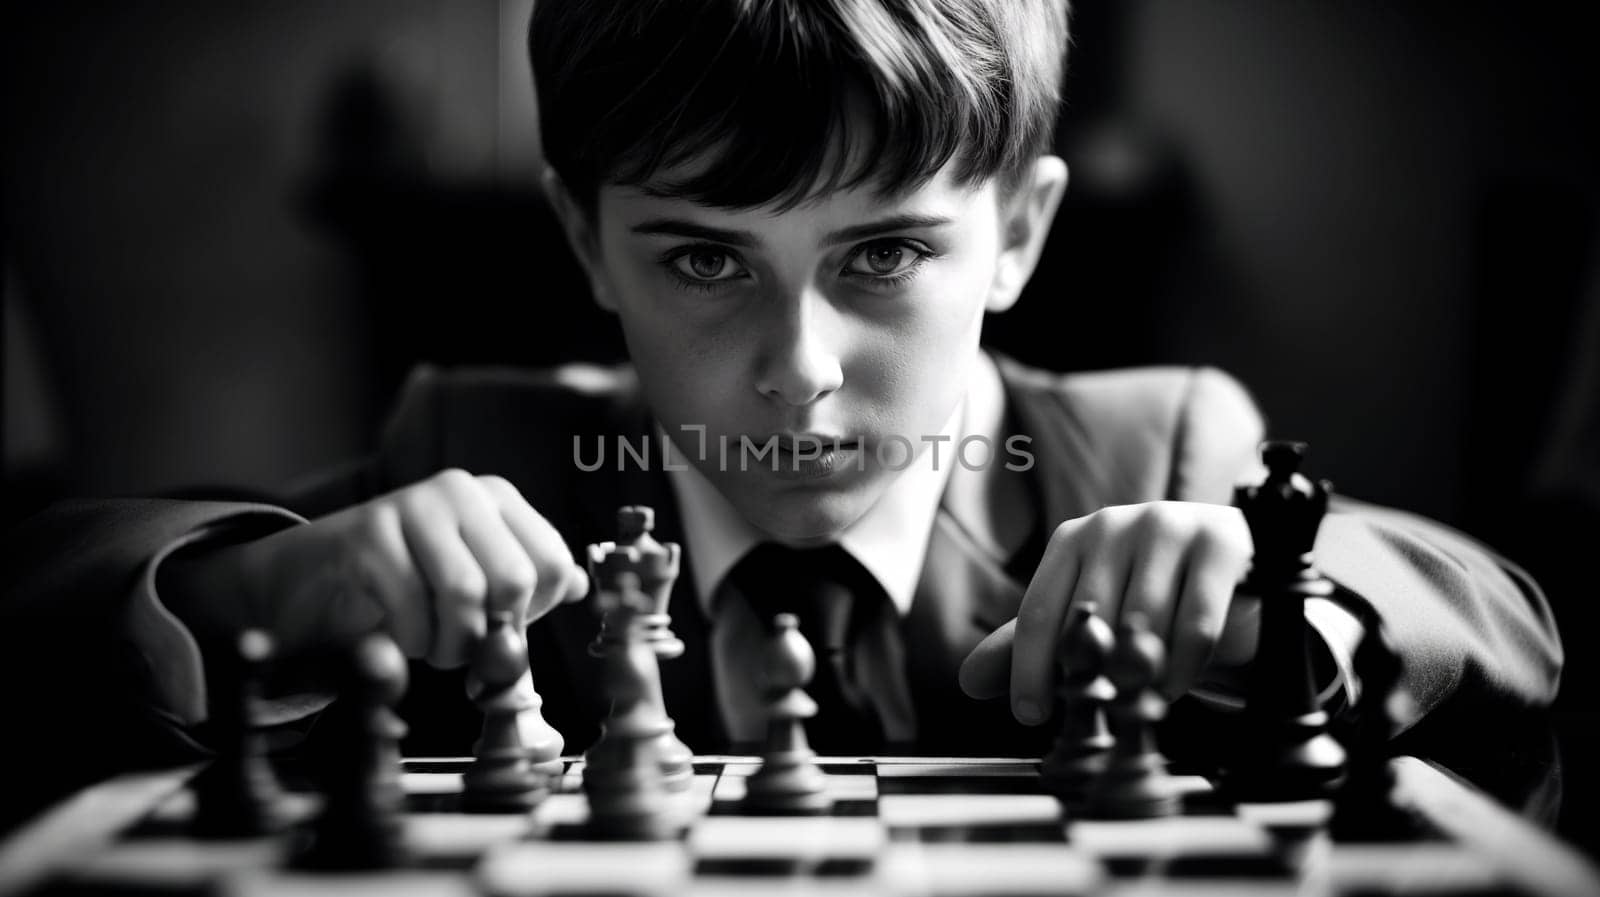 Young Chess Prodigy in Deep Concentration by chrisroll